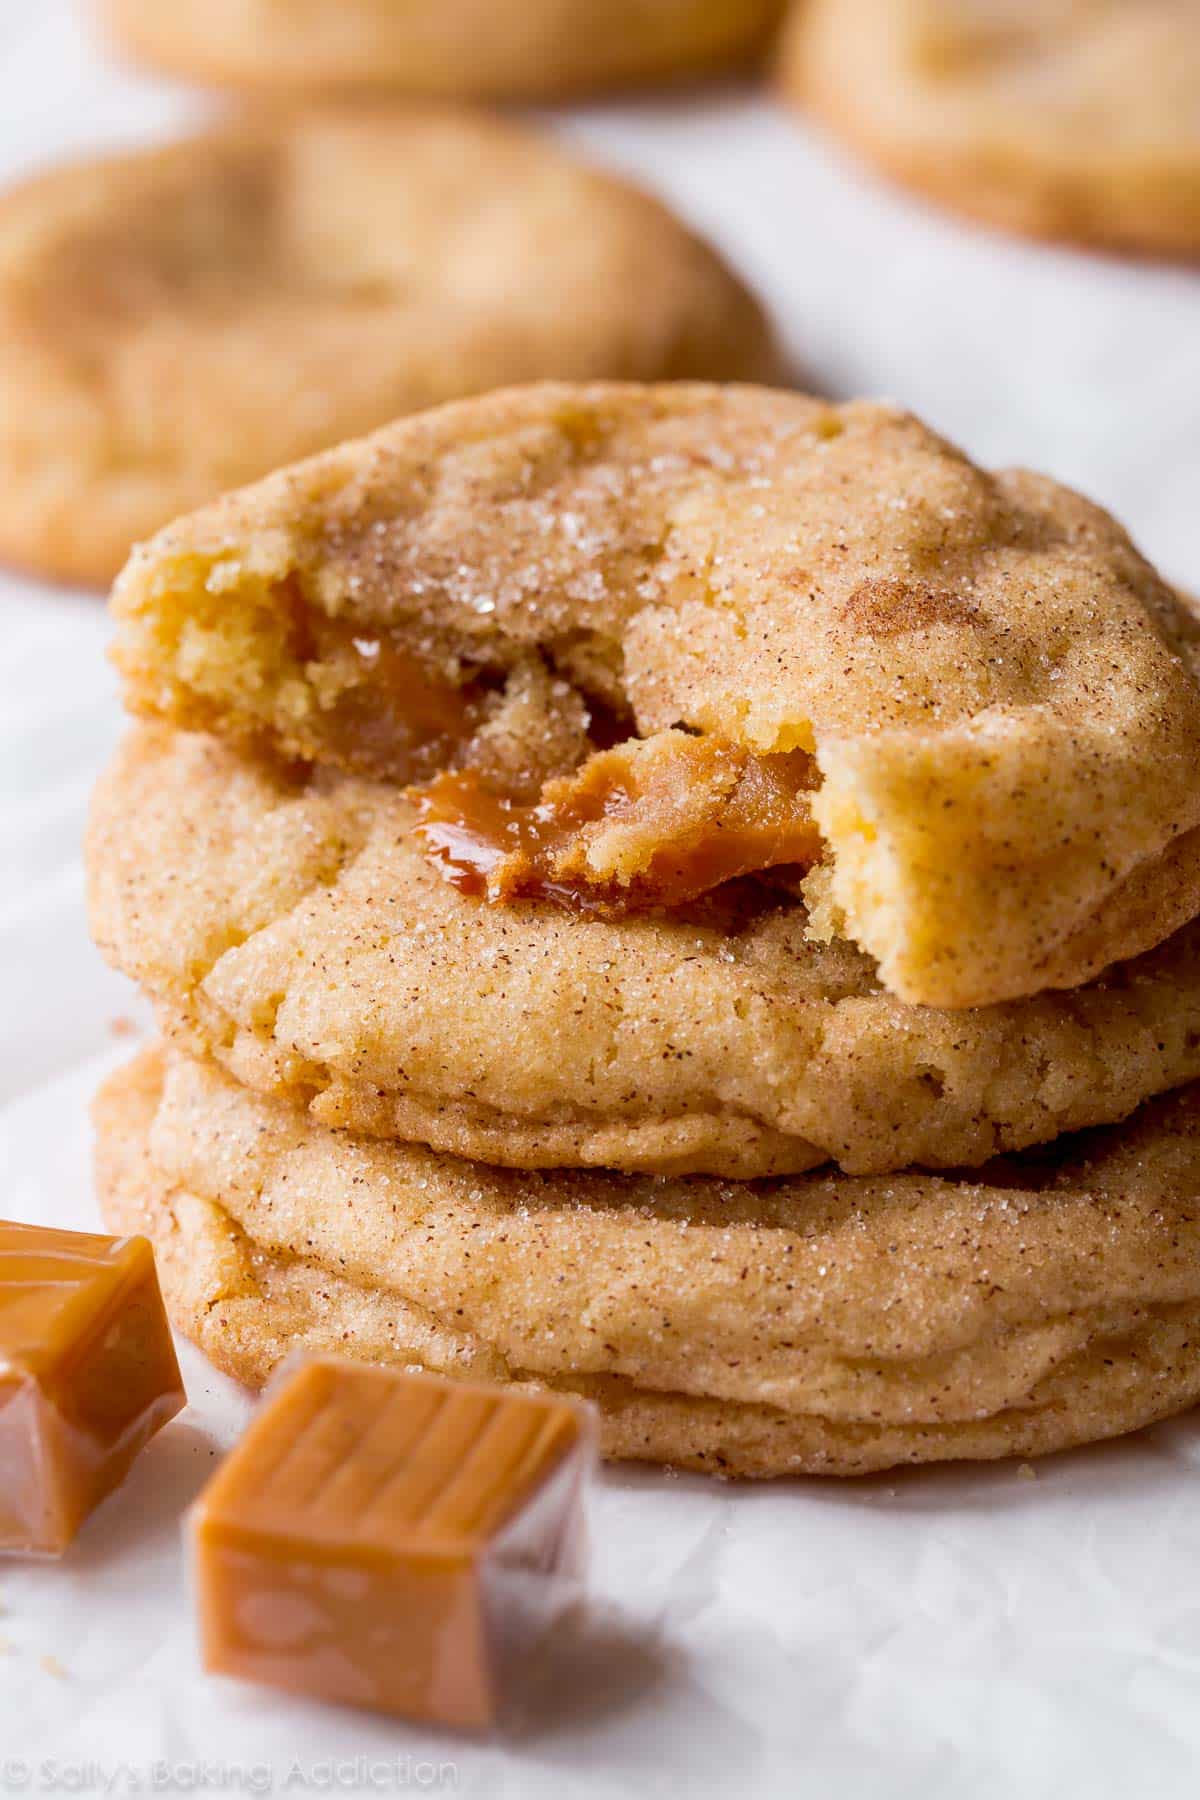 stack of caramel snickerdoodle cookies with one broken in half showing the caramel inside